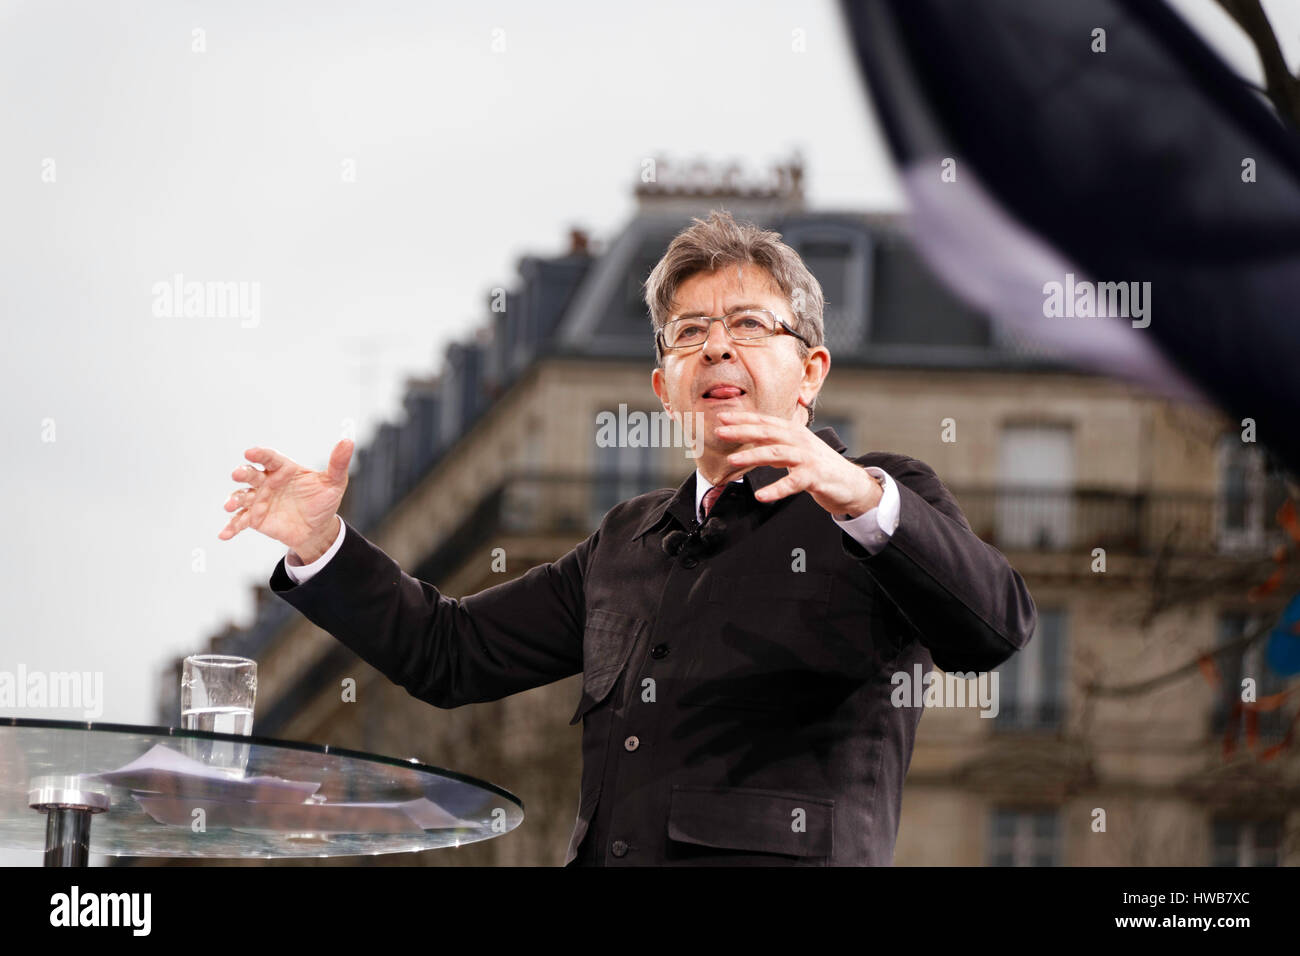 Paris, France. 18th March, 2017. Jean Luc Melenchon, presidential candidate speaks at the arrival of the parade for the 6th republic on the podium of the Place de la République in Paris, France. Credit: Bernard Menigault/Alamy Live News Stock Photo